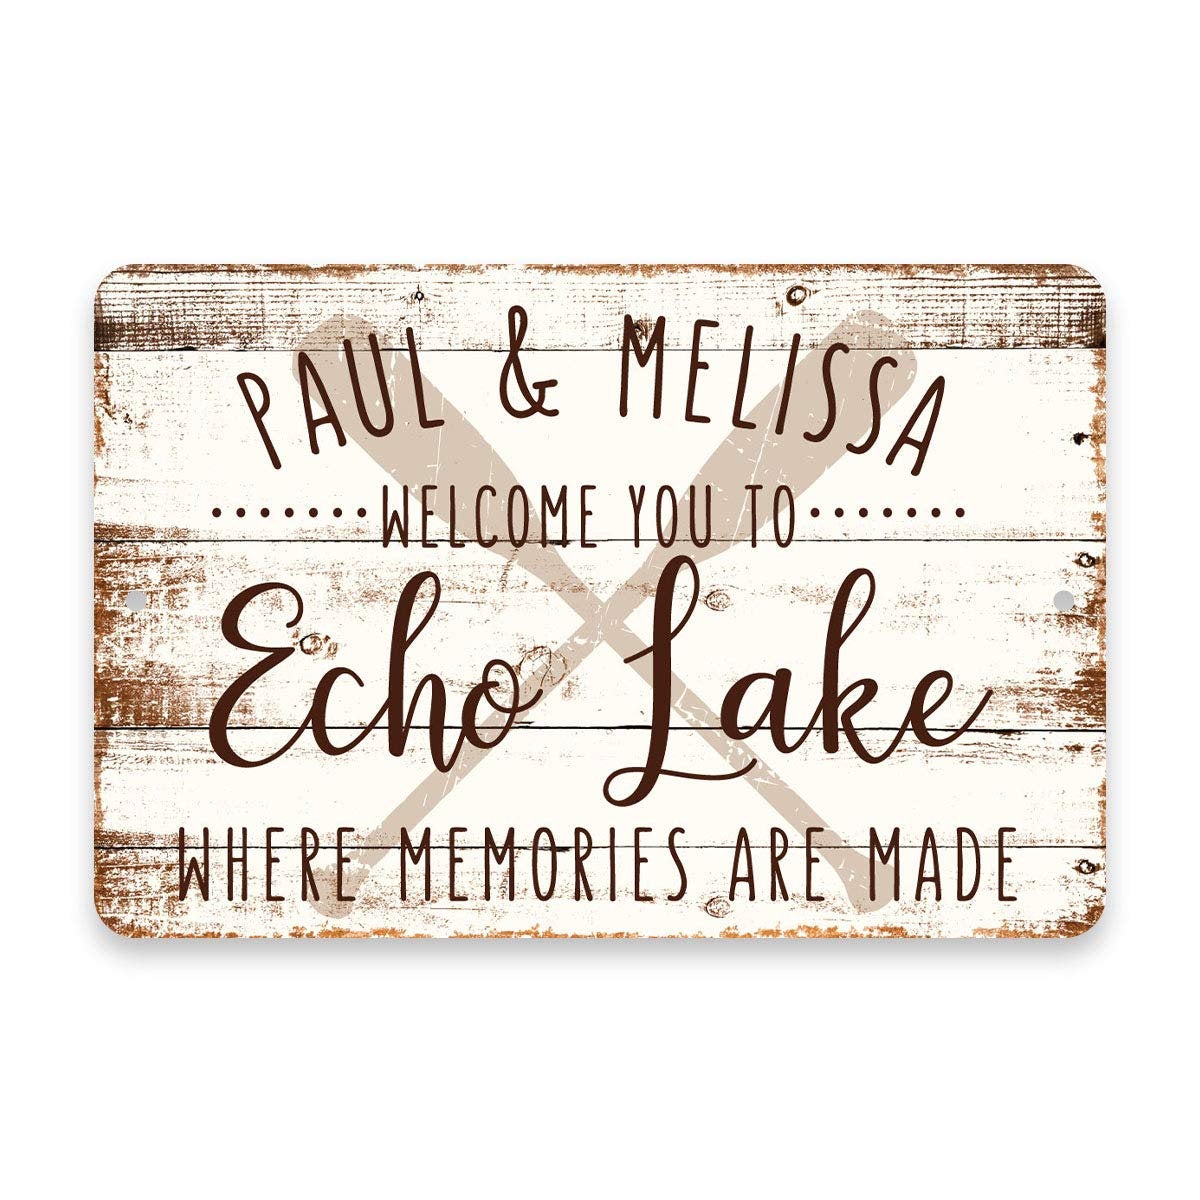 Personalized Welcome to Echo Lake Where Memories are Made Sign - 8 X 12 Metal Sign with Wood Look